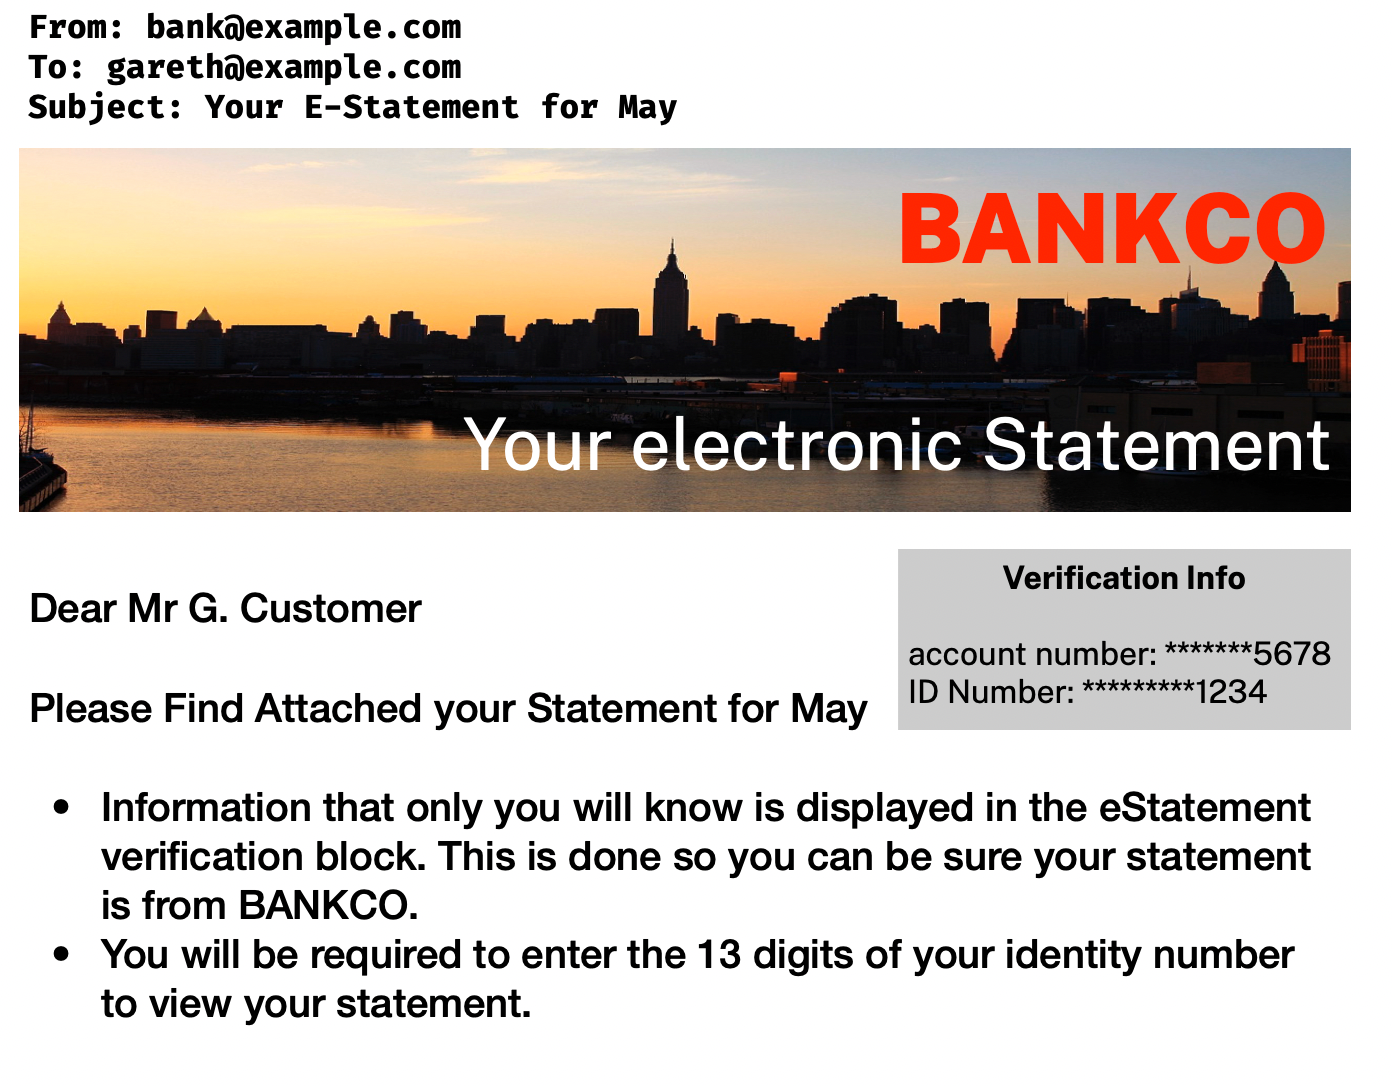 A badly recreated email from a bank, with a banner "your electronic statement". The intro reads: Dear Mr G. Customer Please Find Attached your Statement for May • Information that only you will know is displayed in the eStatement verification block. This is done so you can be sure your statement is from BANKCO. • You will be required to enter the 13 digits of your identity number to view your statement. There is an additional box: Verification Info account number: *******5678 ID Number: *********1234